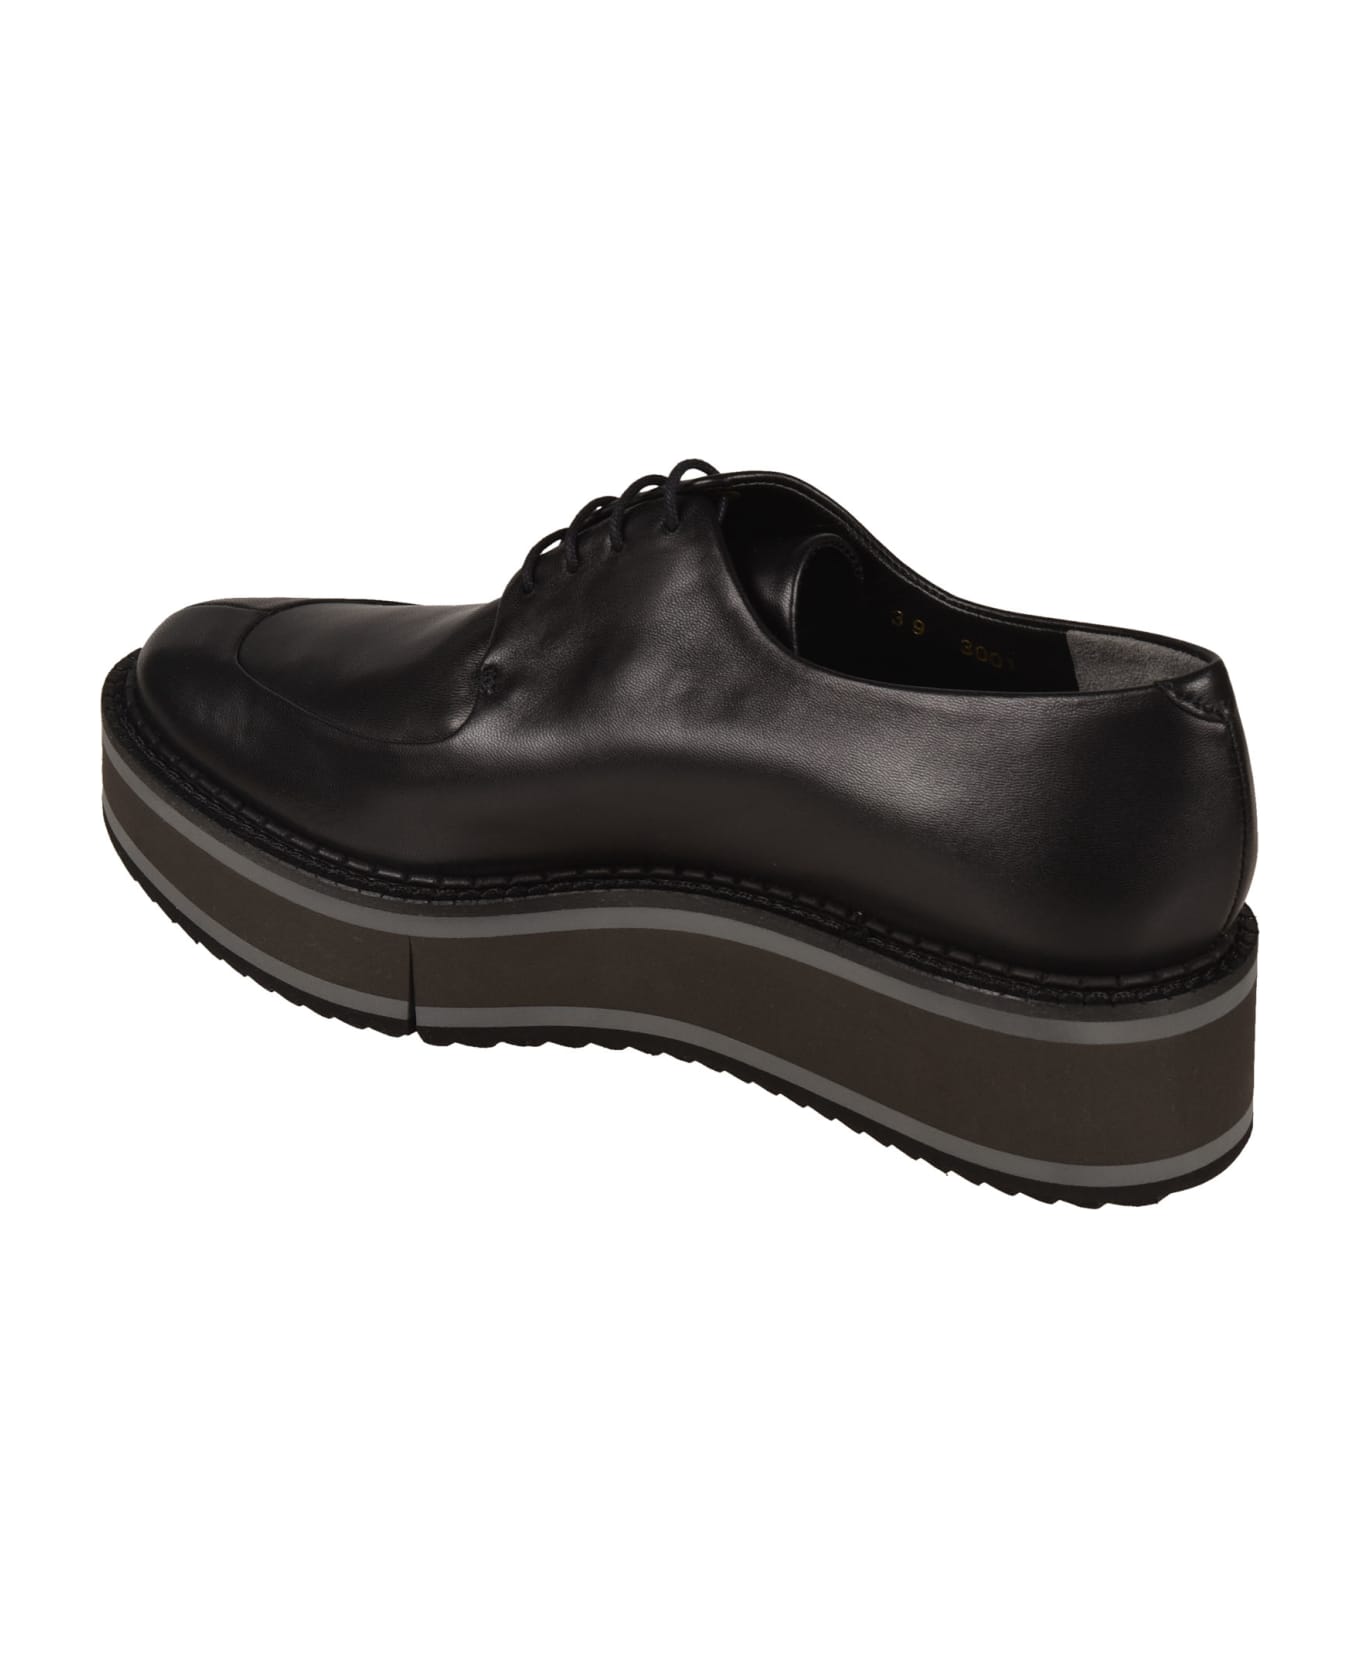 Clergerie Bree Oxford Shoes - Black